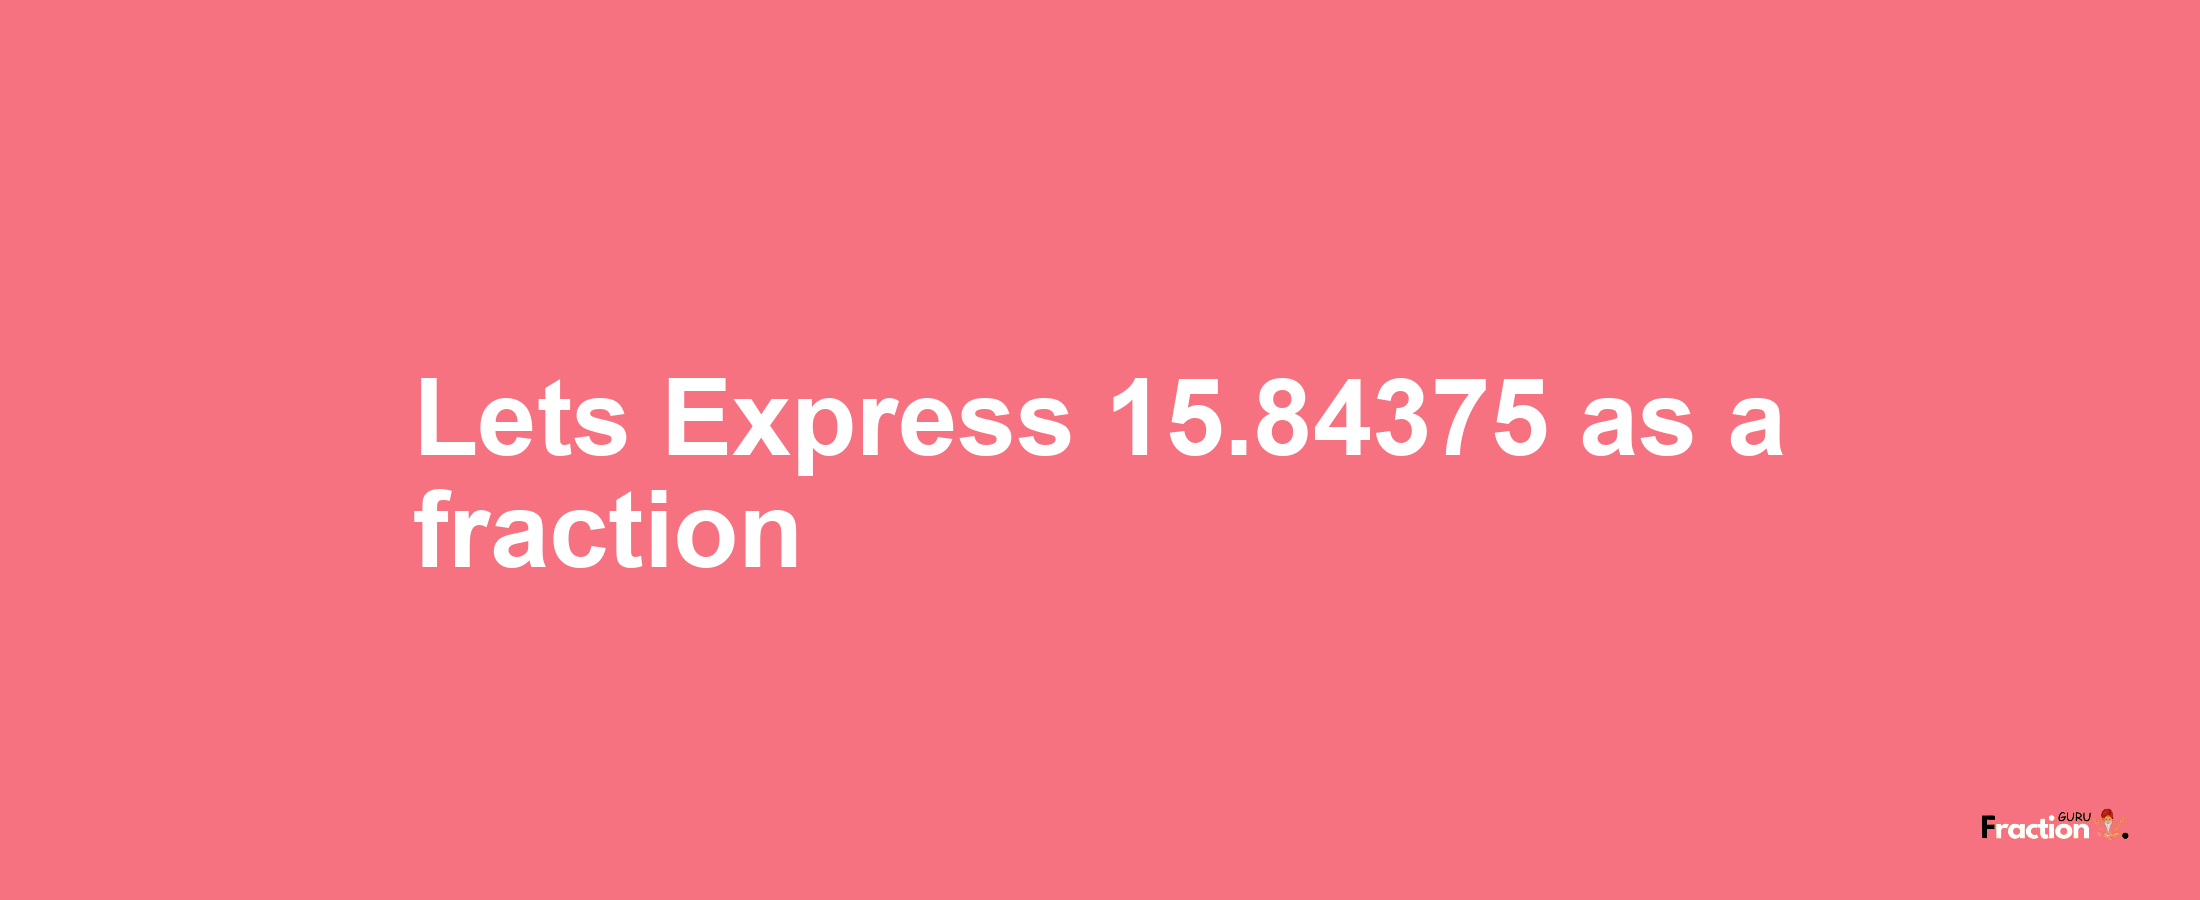 Lets Express 15.84375 as afraction